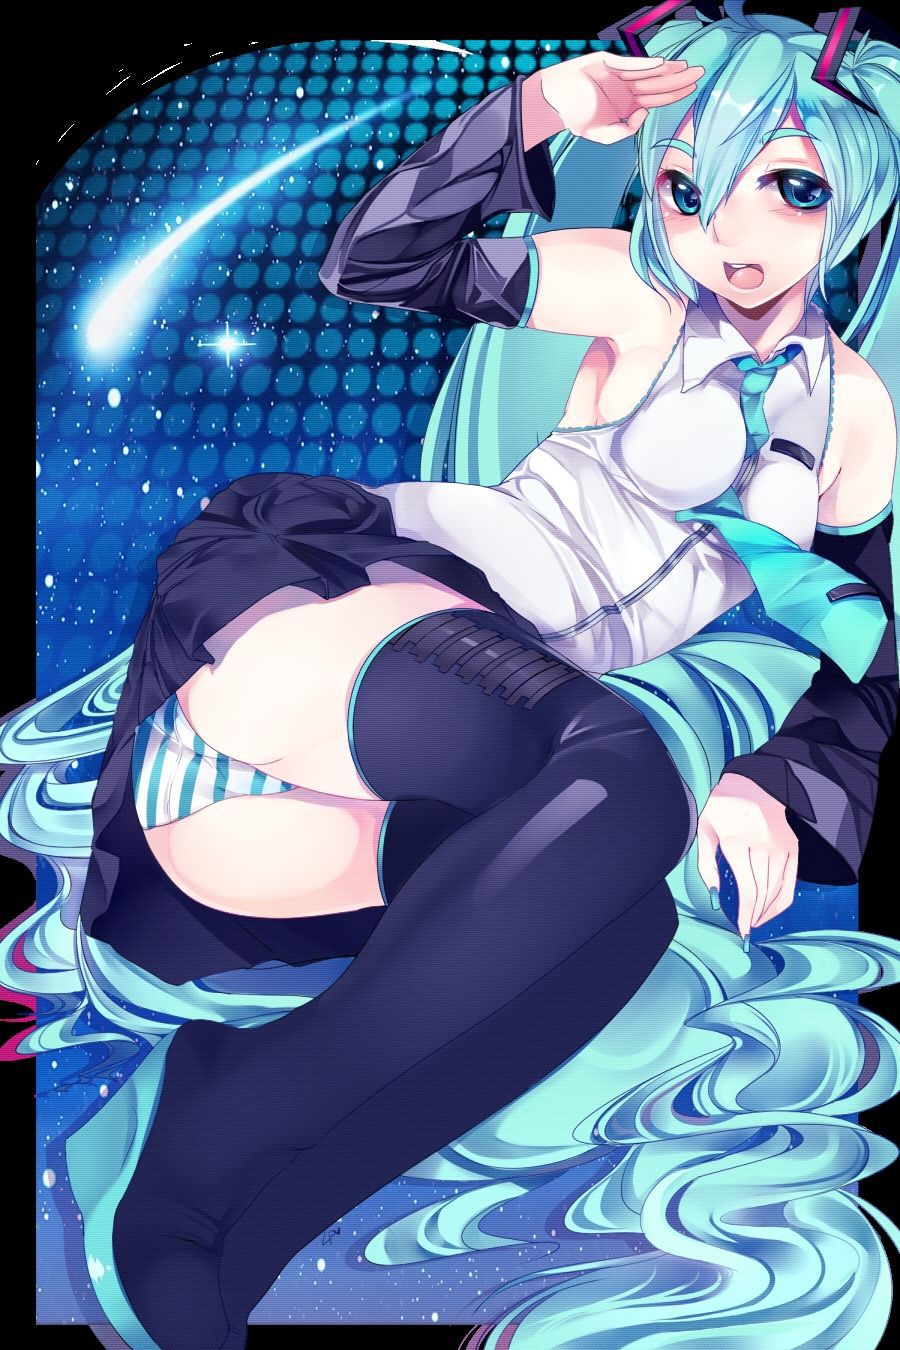 【Secondary】All-purpose vocaloid sei hatsune miku who is good to sing and nui good 13